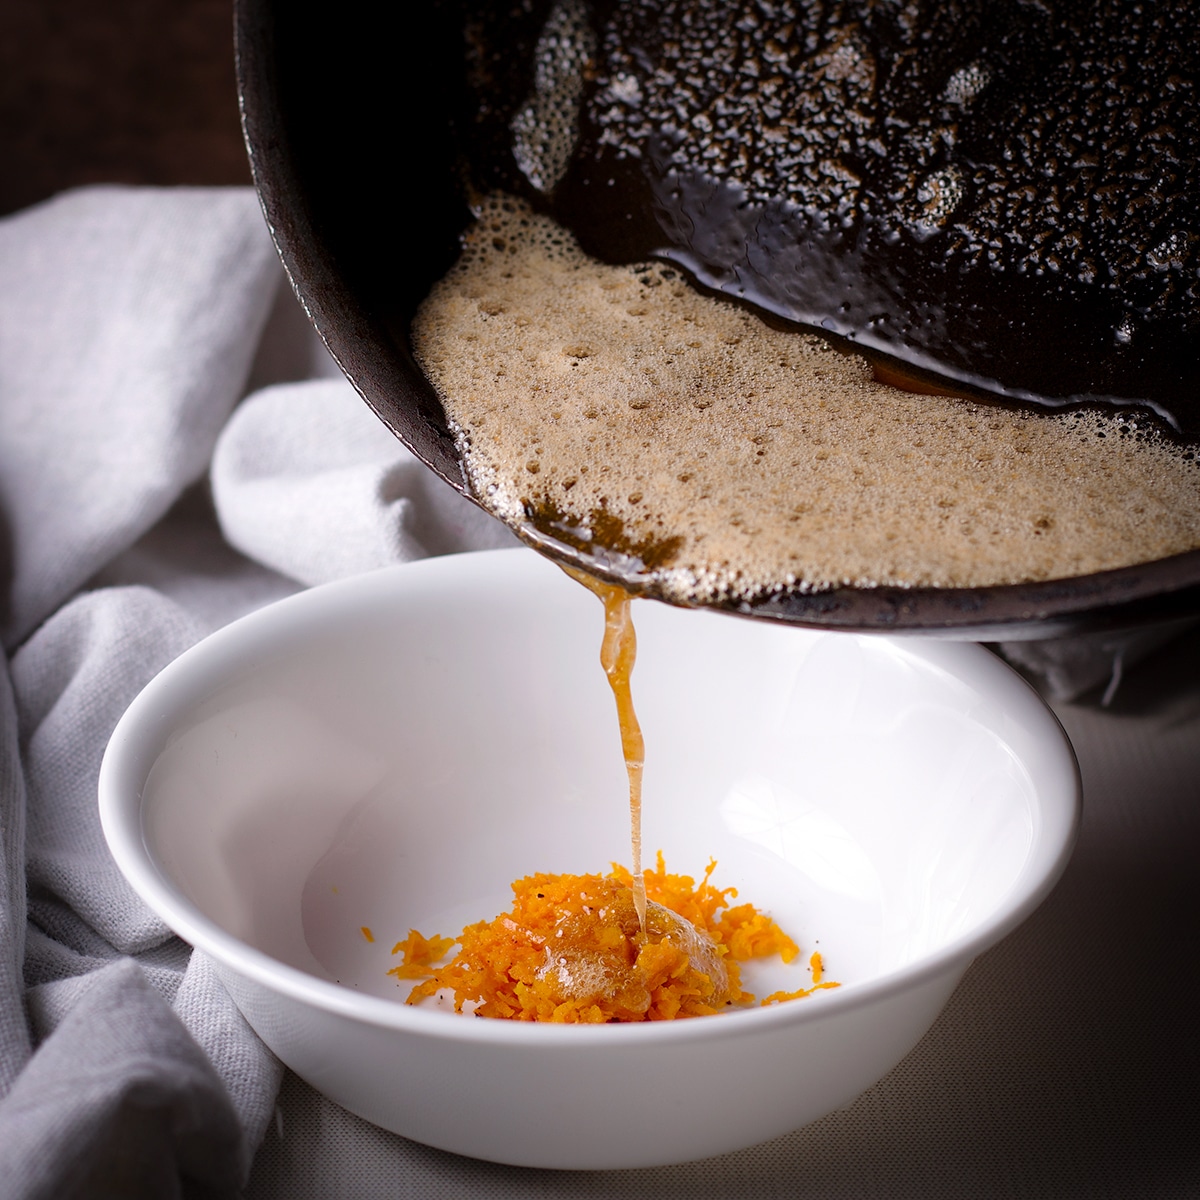 Pouring brown butter from a skillet into a white bowl containing orange zest and ground cloves.